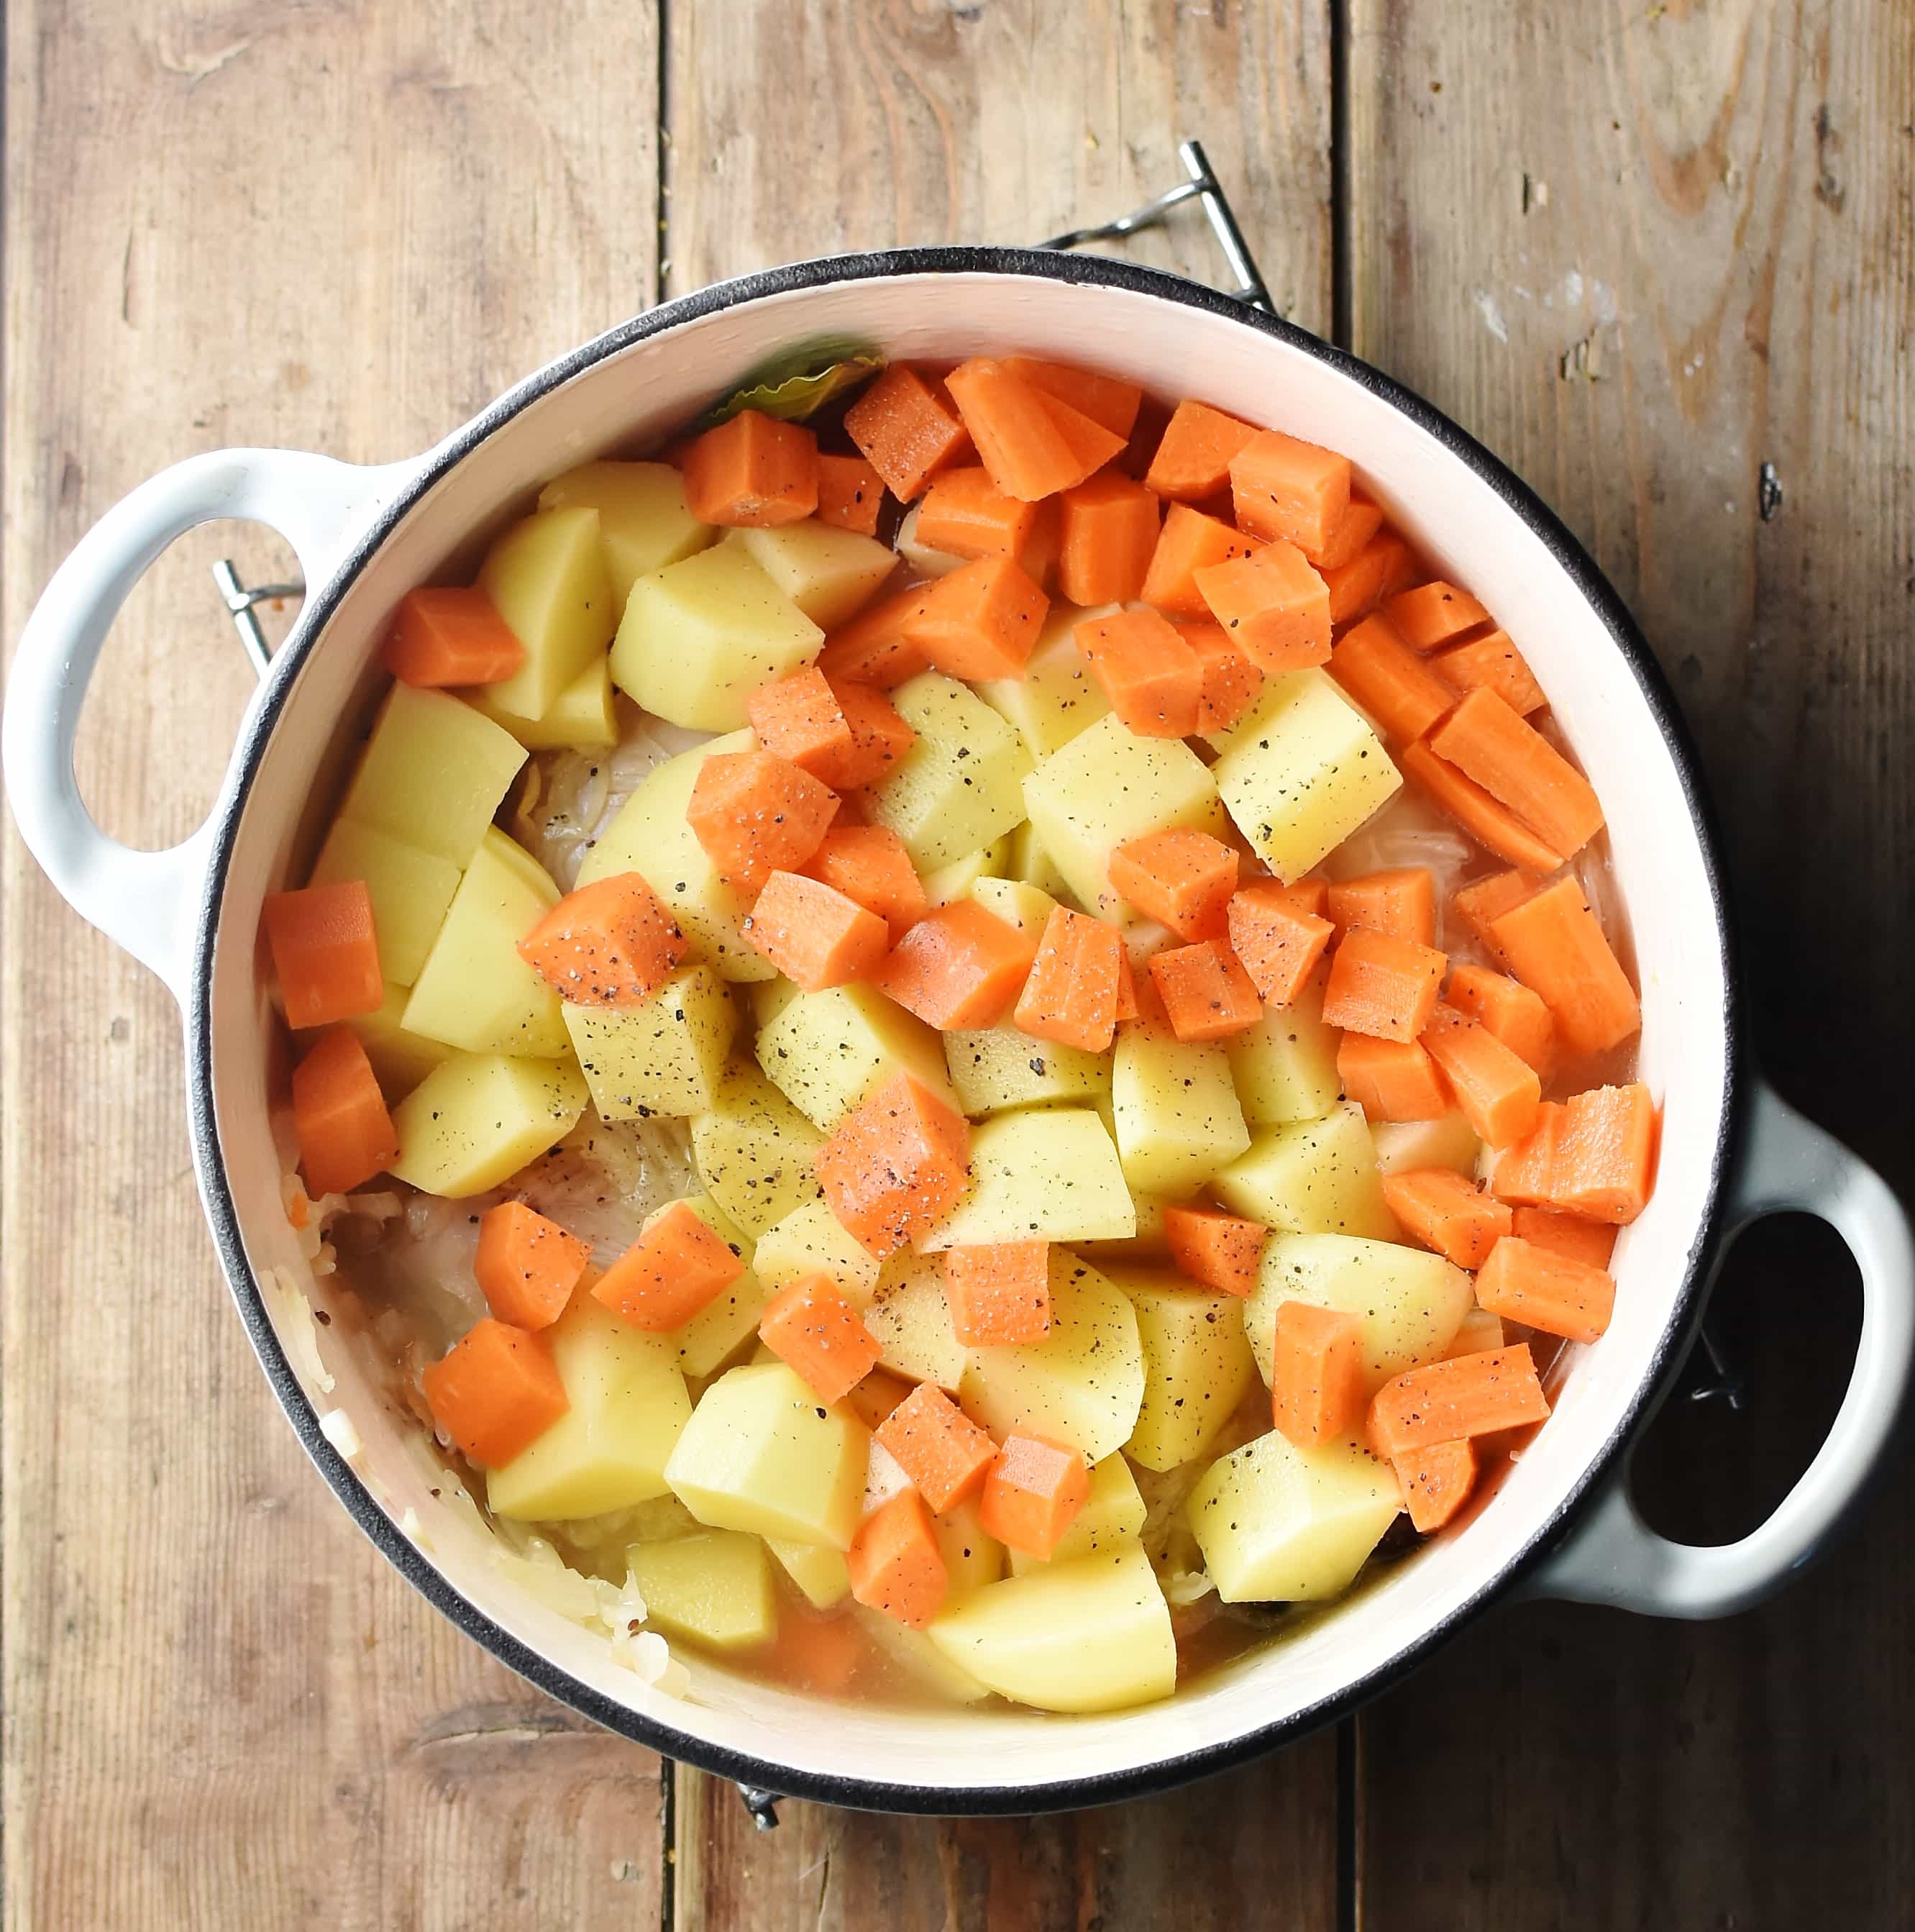 Cubed potatoes and carrots in large white pot.